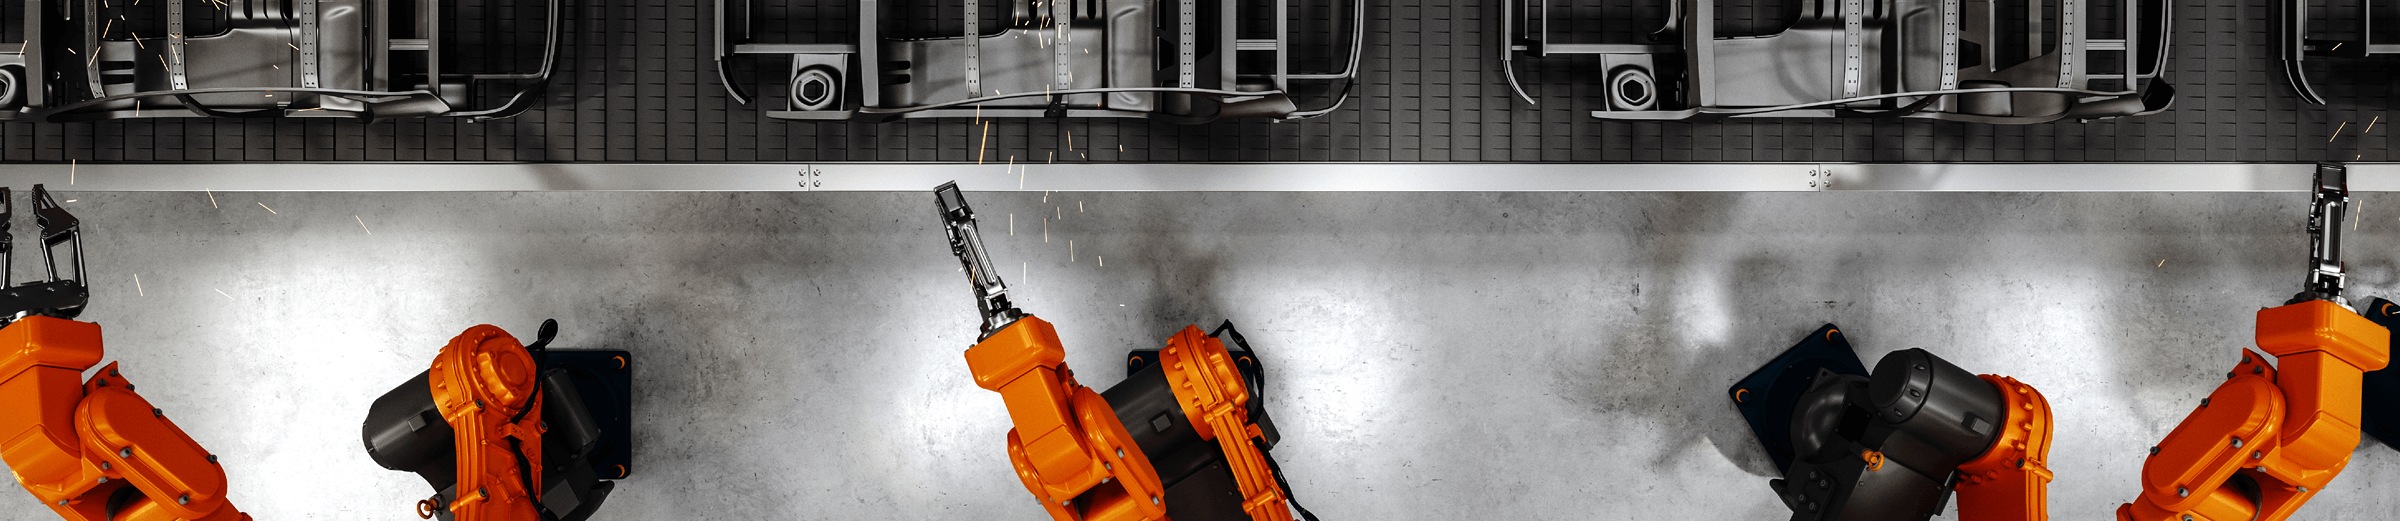 A top-down view of an industrial setting featuring three bright orange industrial robots with black bases, positioned on a grey floor. Each robot is equipped with different tools at their ends, suggesting specialized functions. Above them, there’s a complex assembly of mechanical components, including gears and conveyors, indicative of a modern automated manufacturing or assembly line. The metallic machinery reflects the ambient light, highlighting the advanced technological environment.